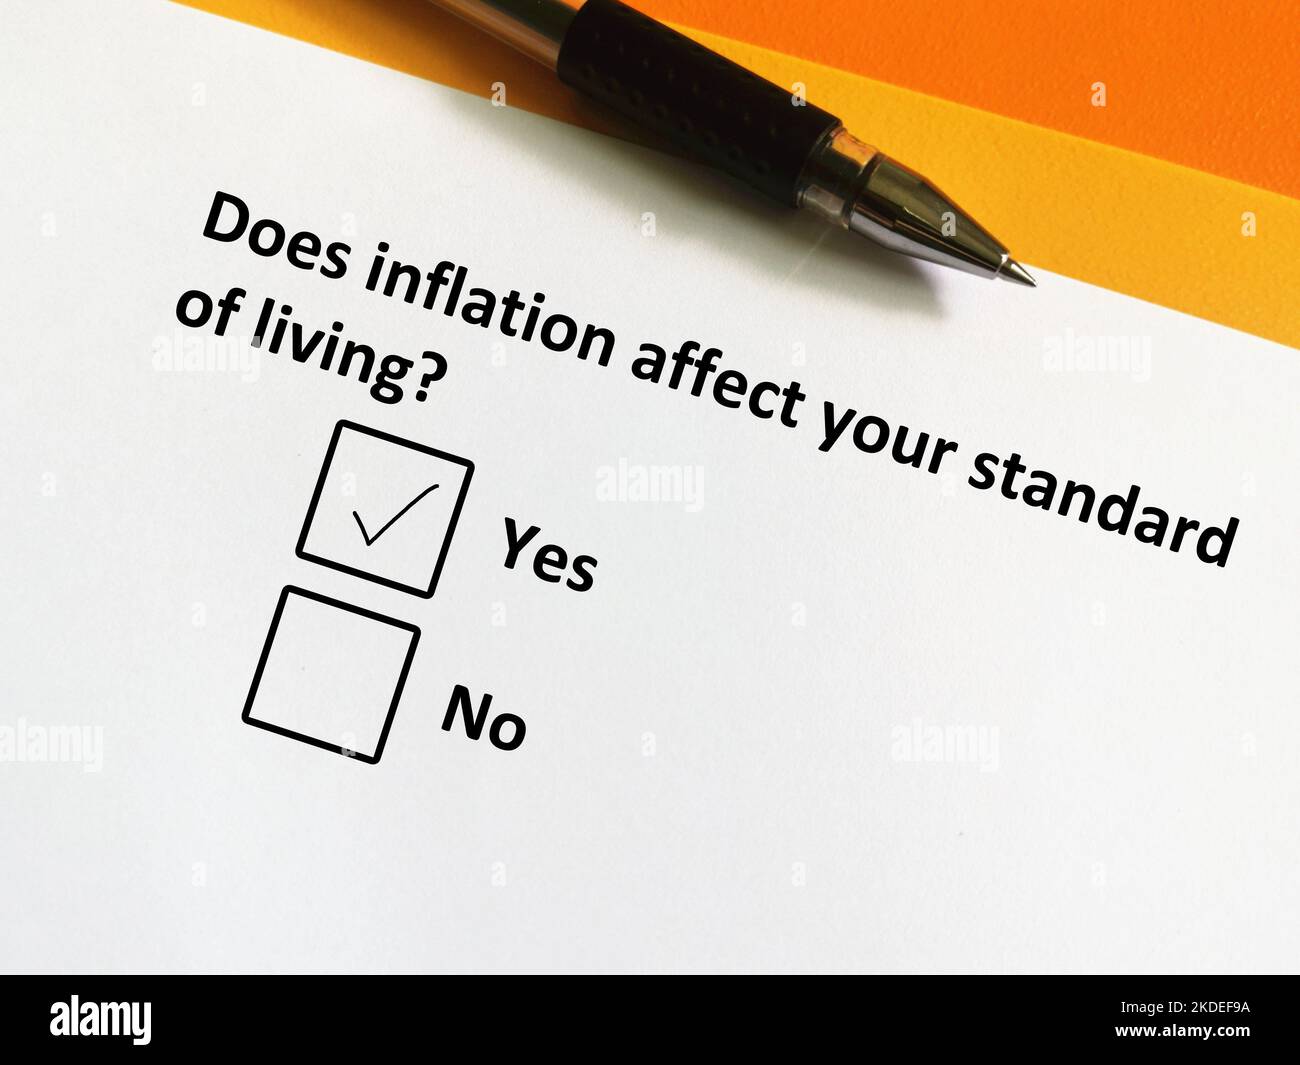 One person is answering question about inflation. He thinks inflation affects his standard of living. Stock Photo